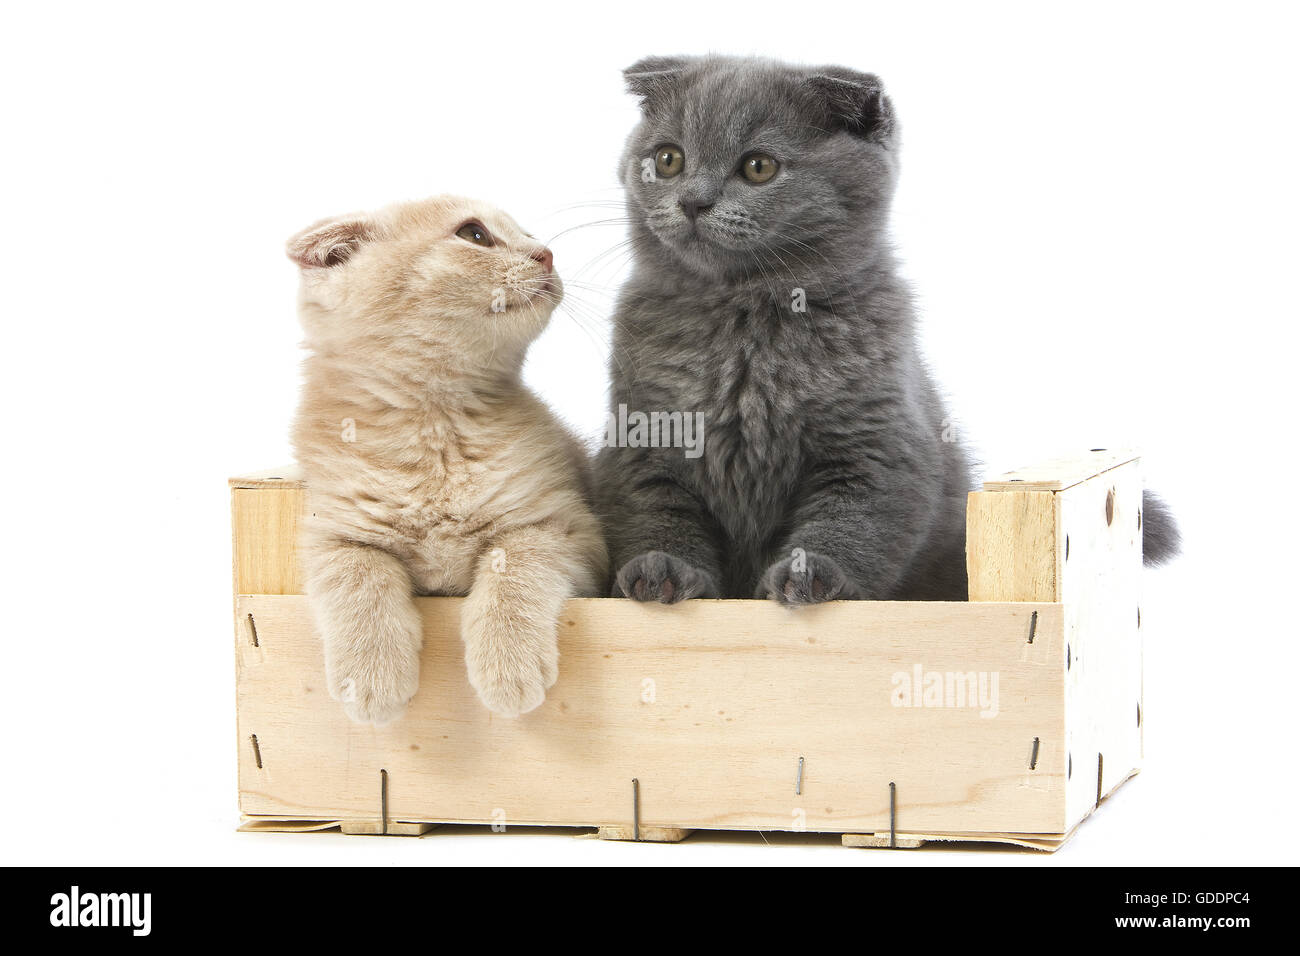 Blue and Cream Scottish Fold Domestic Cat, 2 Months old Kittens standing against White Background Stock Photo